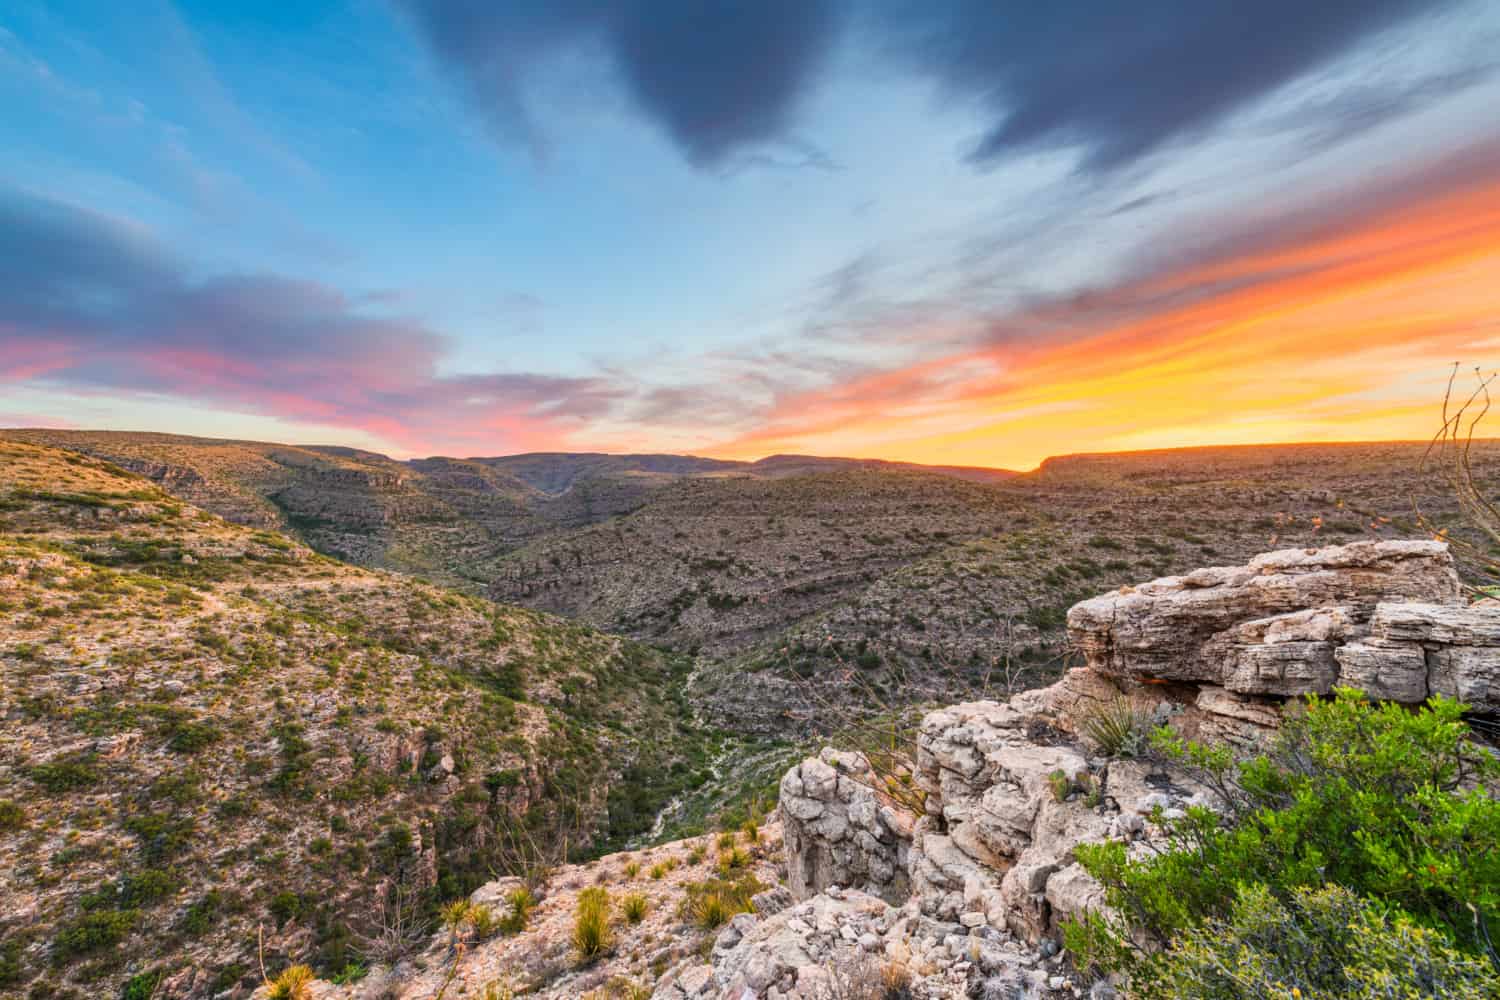 Carlsbad Cavern National Park, New Mexico, USA overlooking Rattlesnake Canyon just after sunset